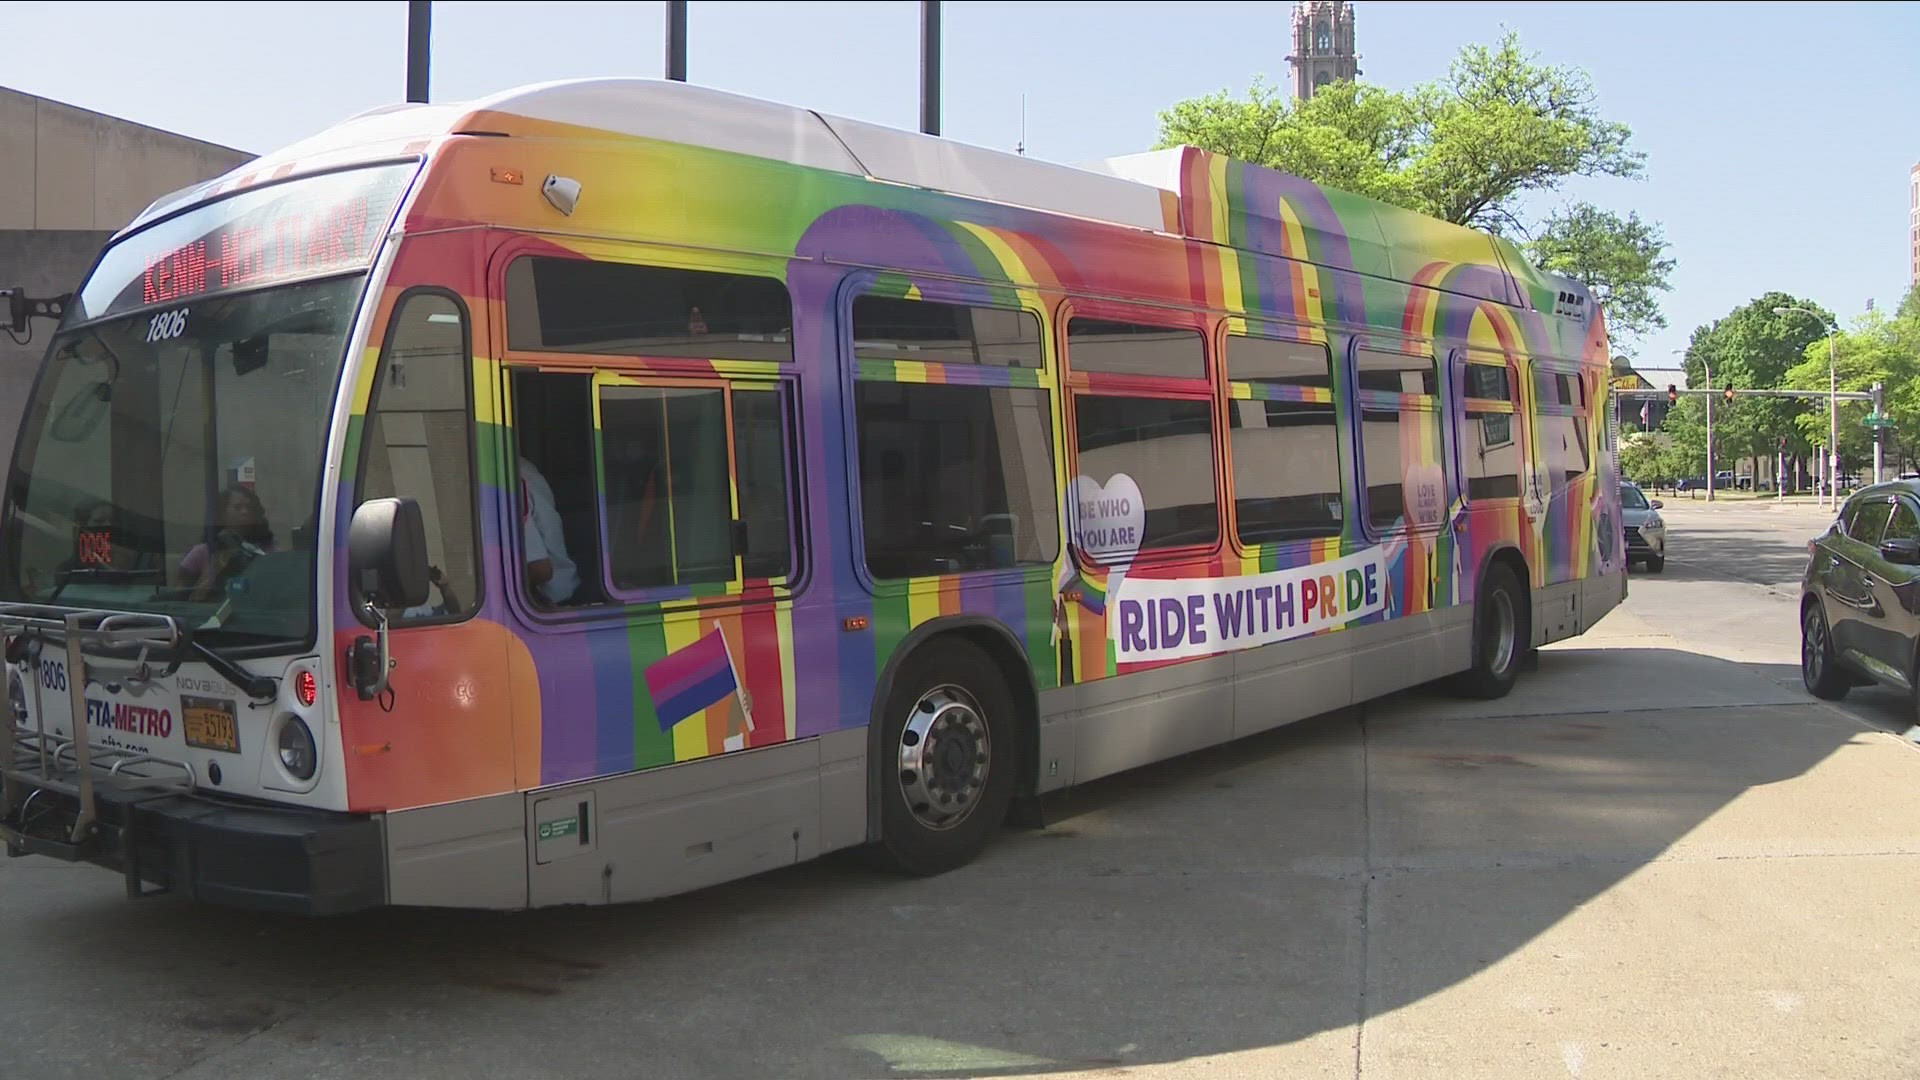 The NFTA unveils pride-themed bus wrapped in the colors of the rainbow